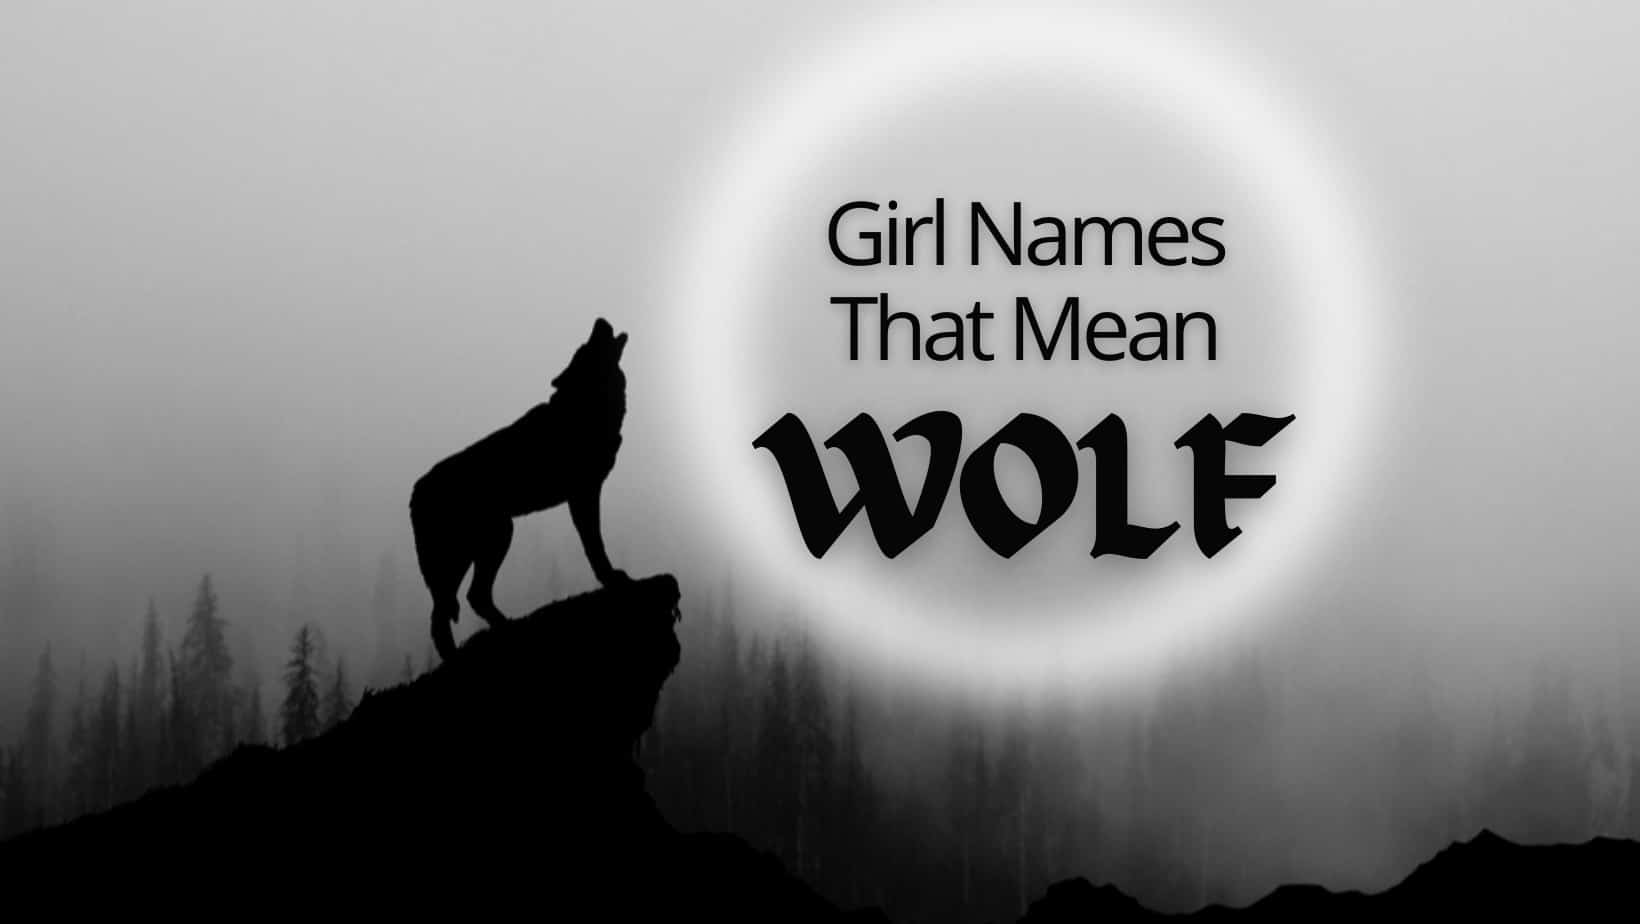 Girl Names That Mean Wolf | MomsWhoThink.com